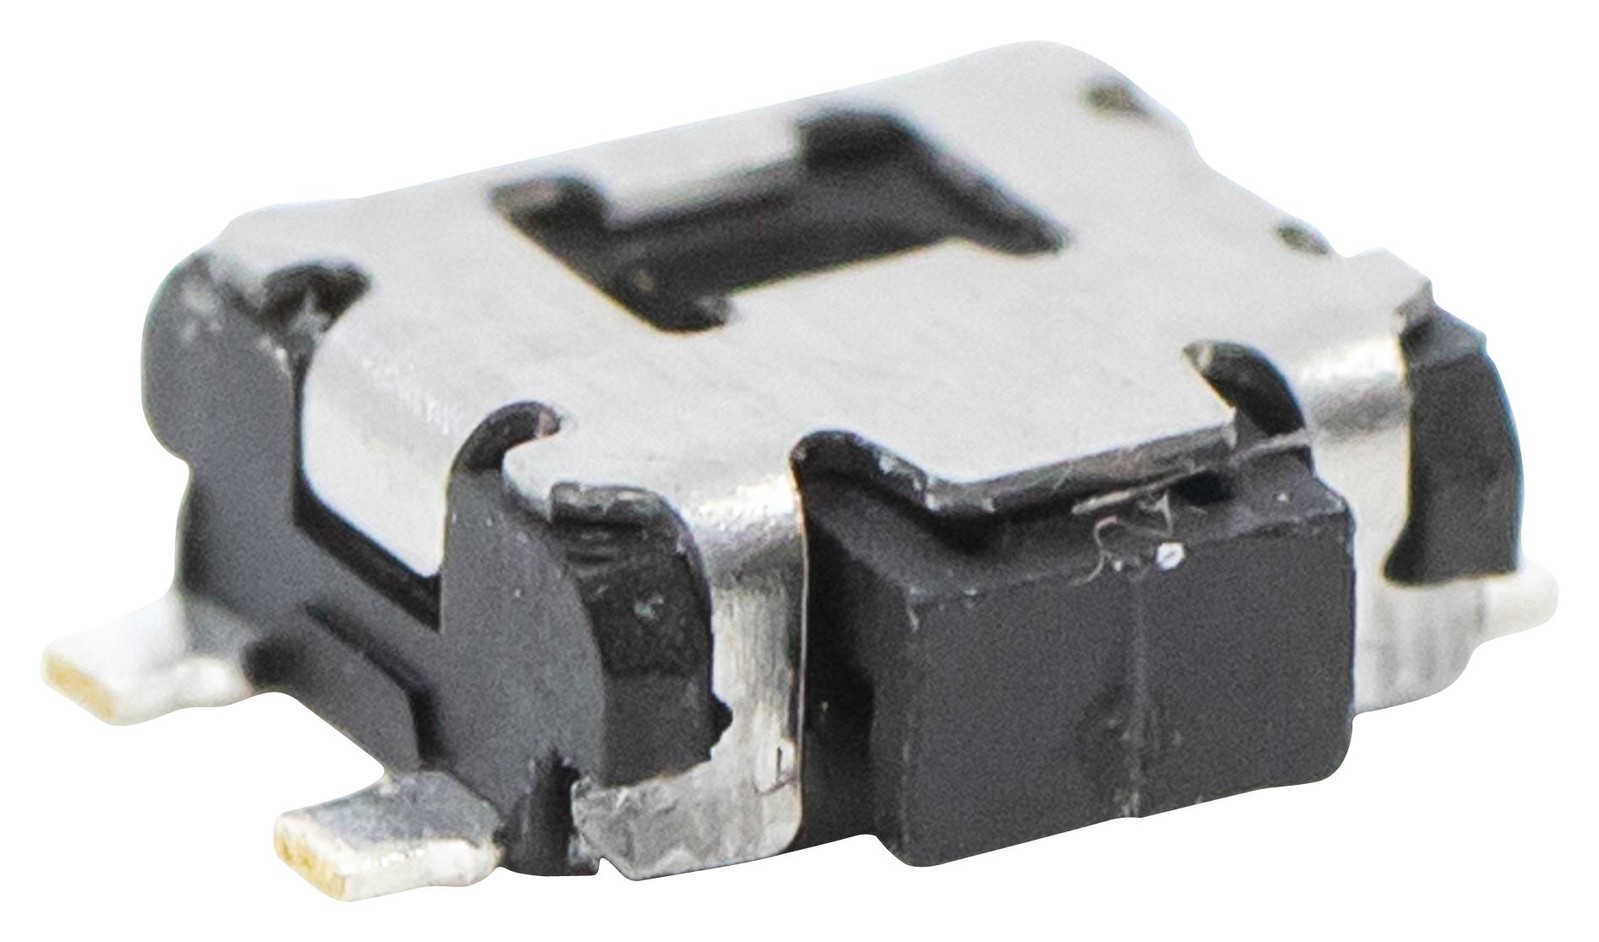 E-Switch Tl1016Bbf160Qg Tactile Switch, 0.05A, 12Vdc, Smd, 160Gf